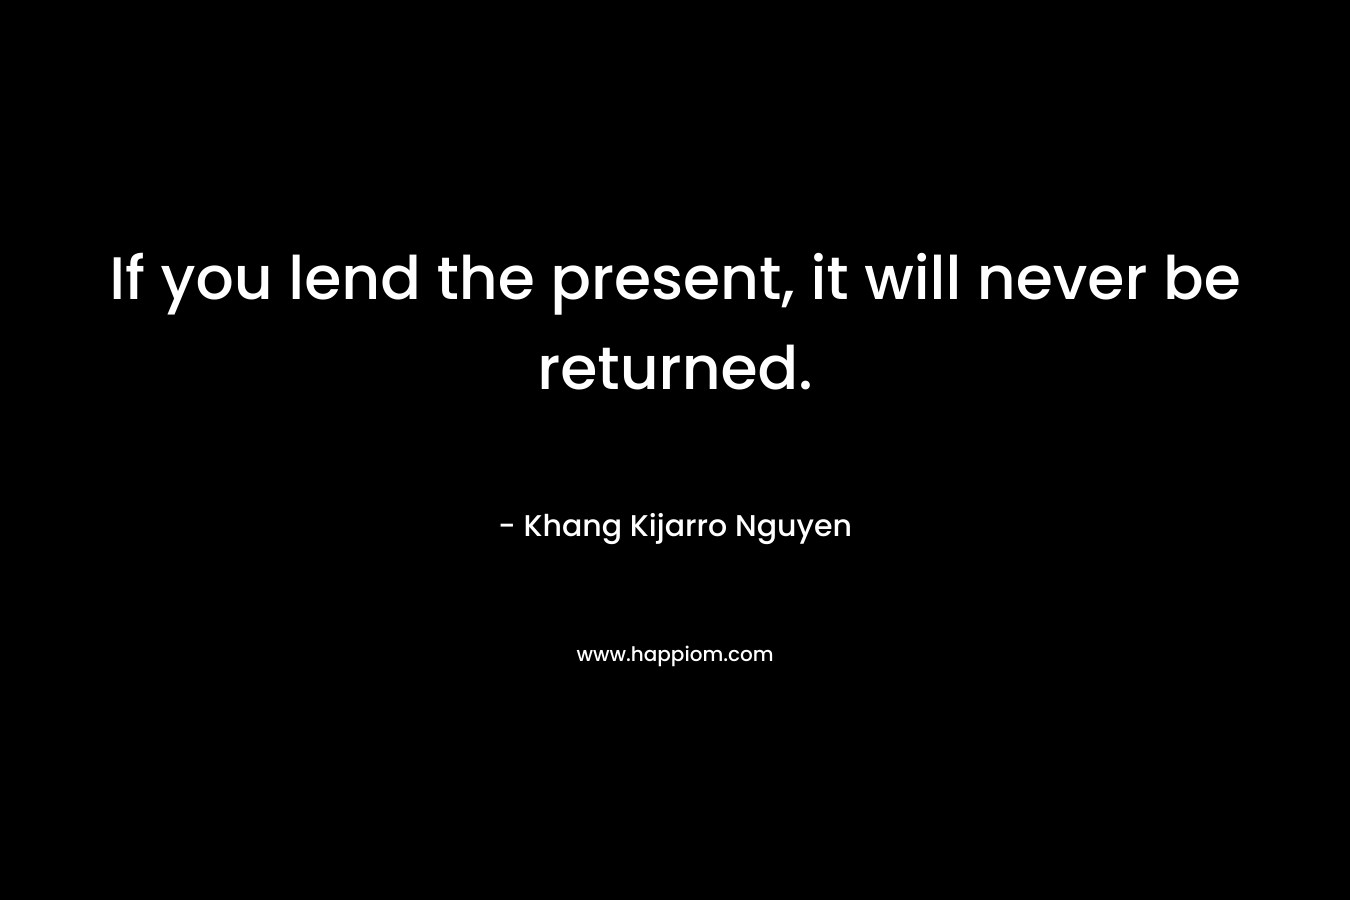 If you lend the present, it will never be returned. – Khang Kijarro Nguyen